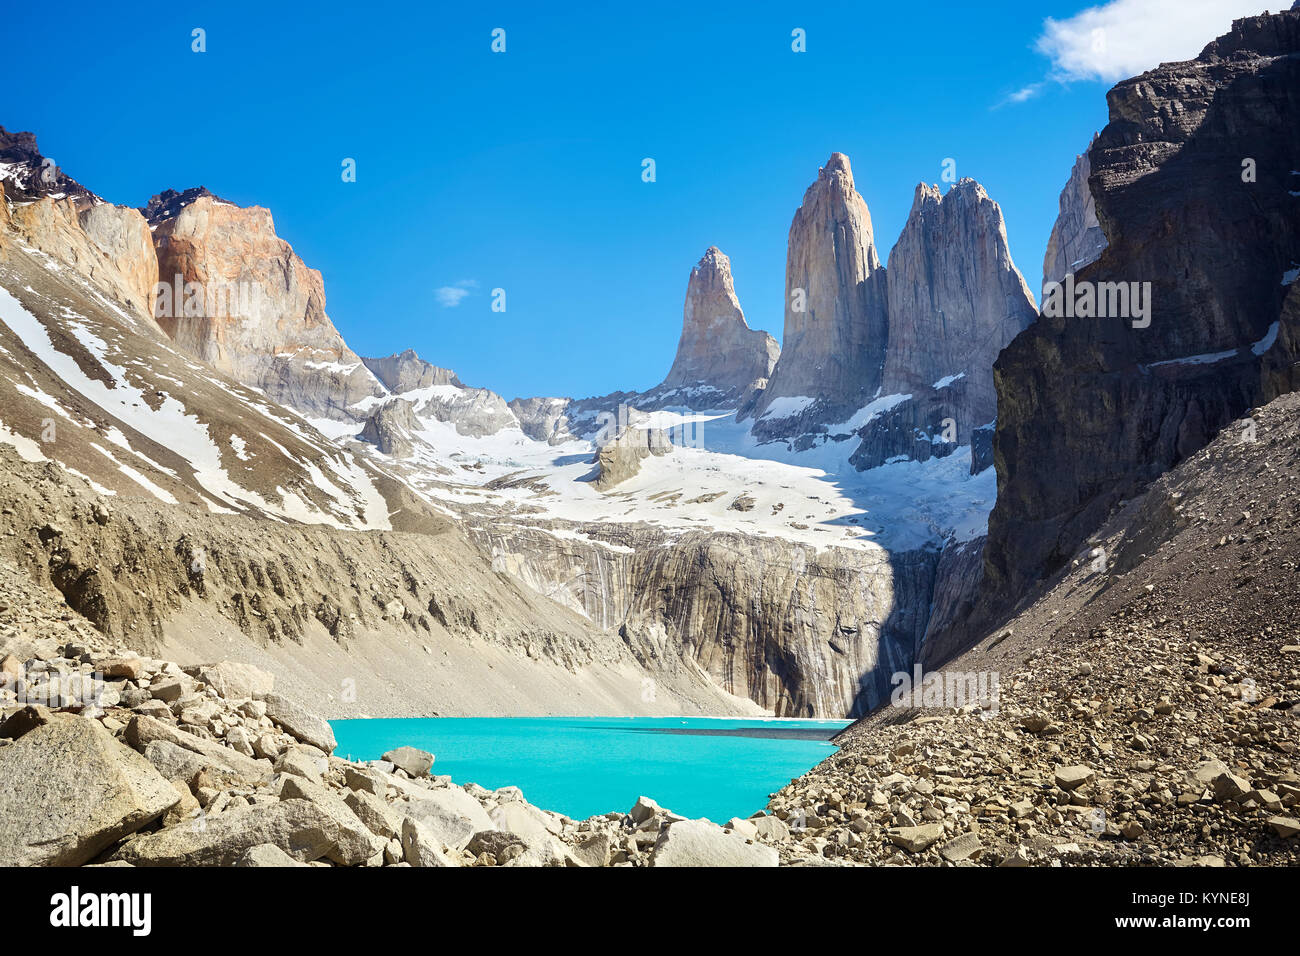 Torres del Paine Nationalpark, Patagonien, Chile. Stockfoto